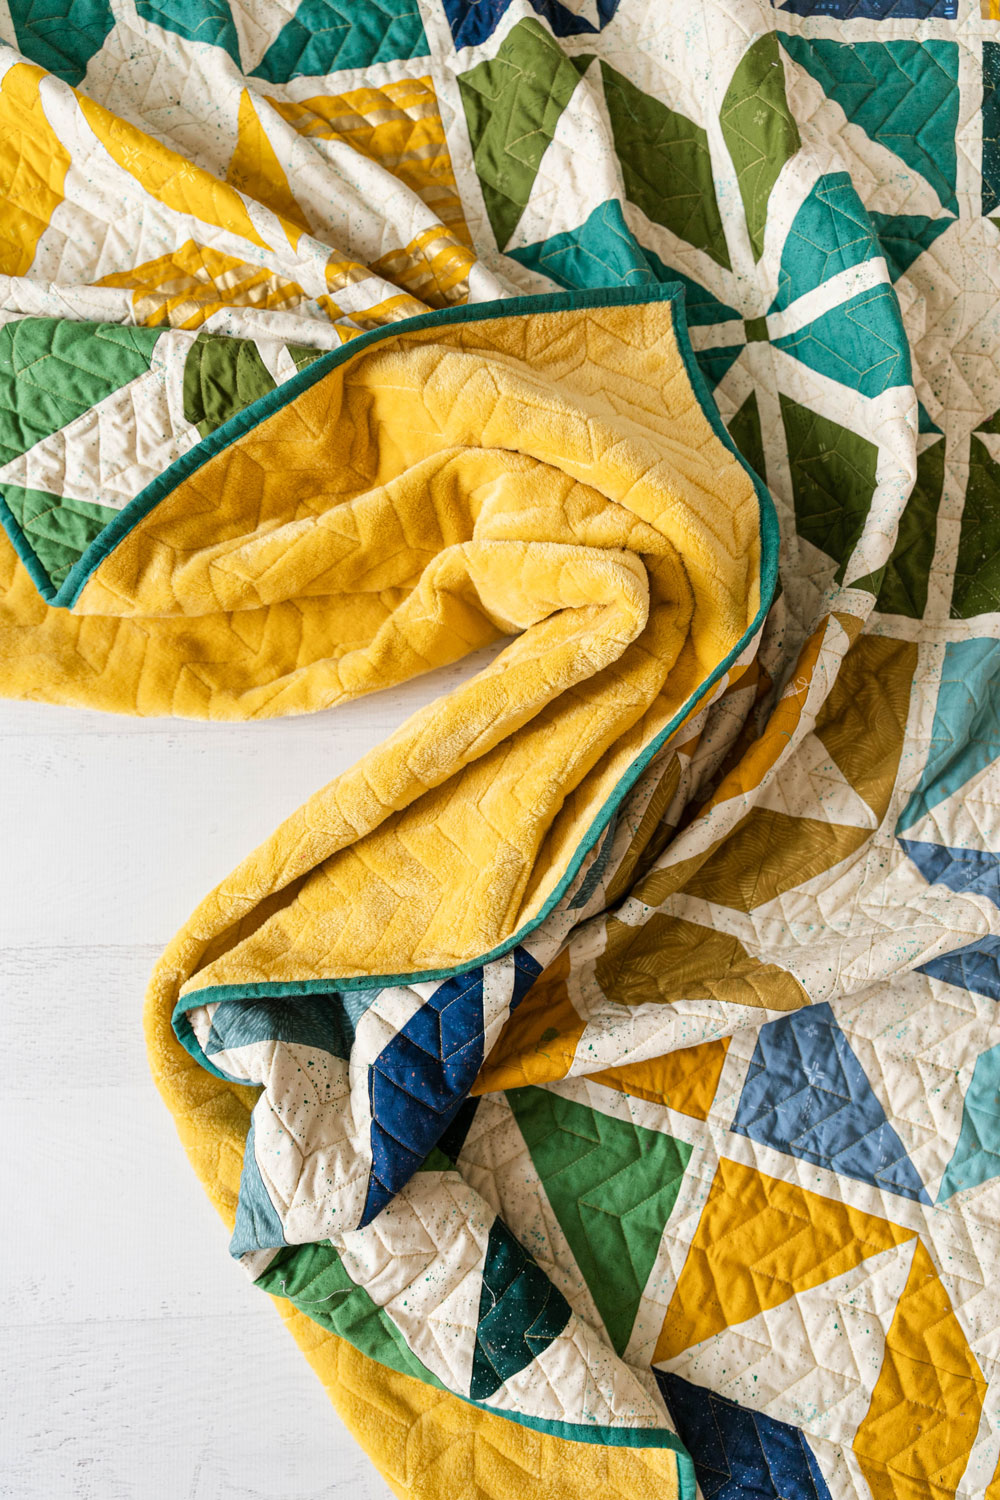 Make your next quilt soft and cuddly with a microfiber blanket as quilt backing. We have tips to help you make your quilt extra cozy! suzyquilts.com